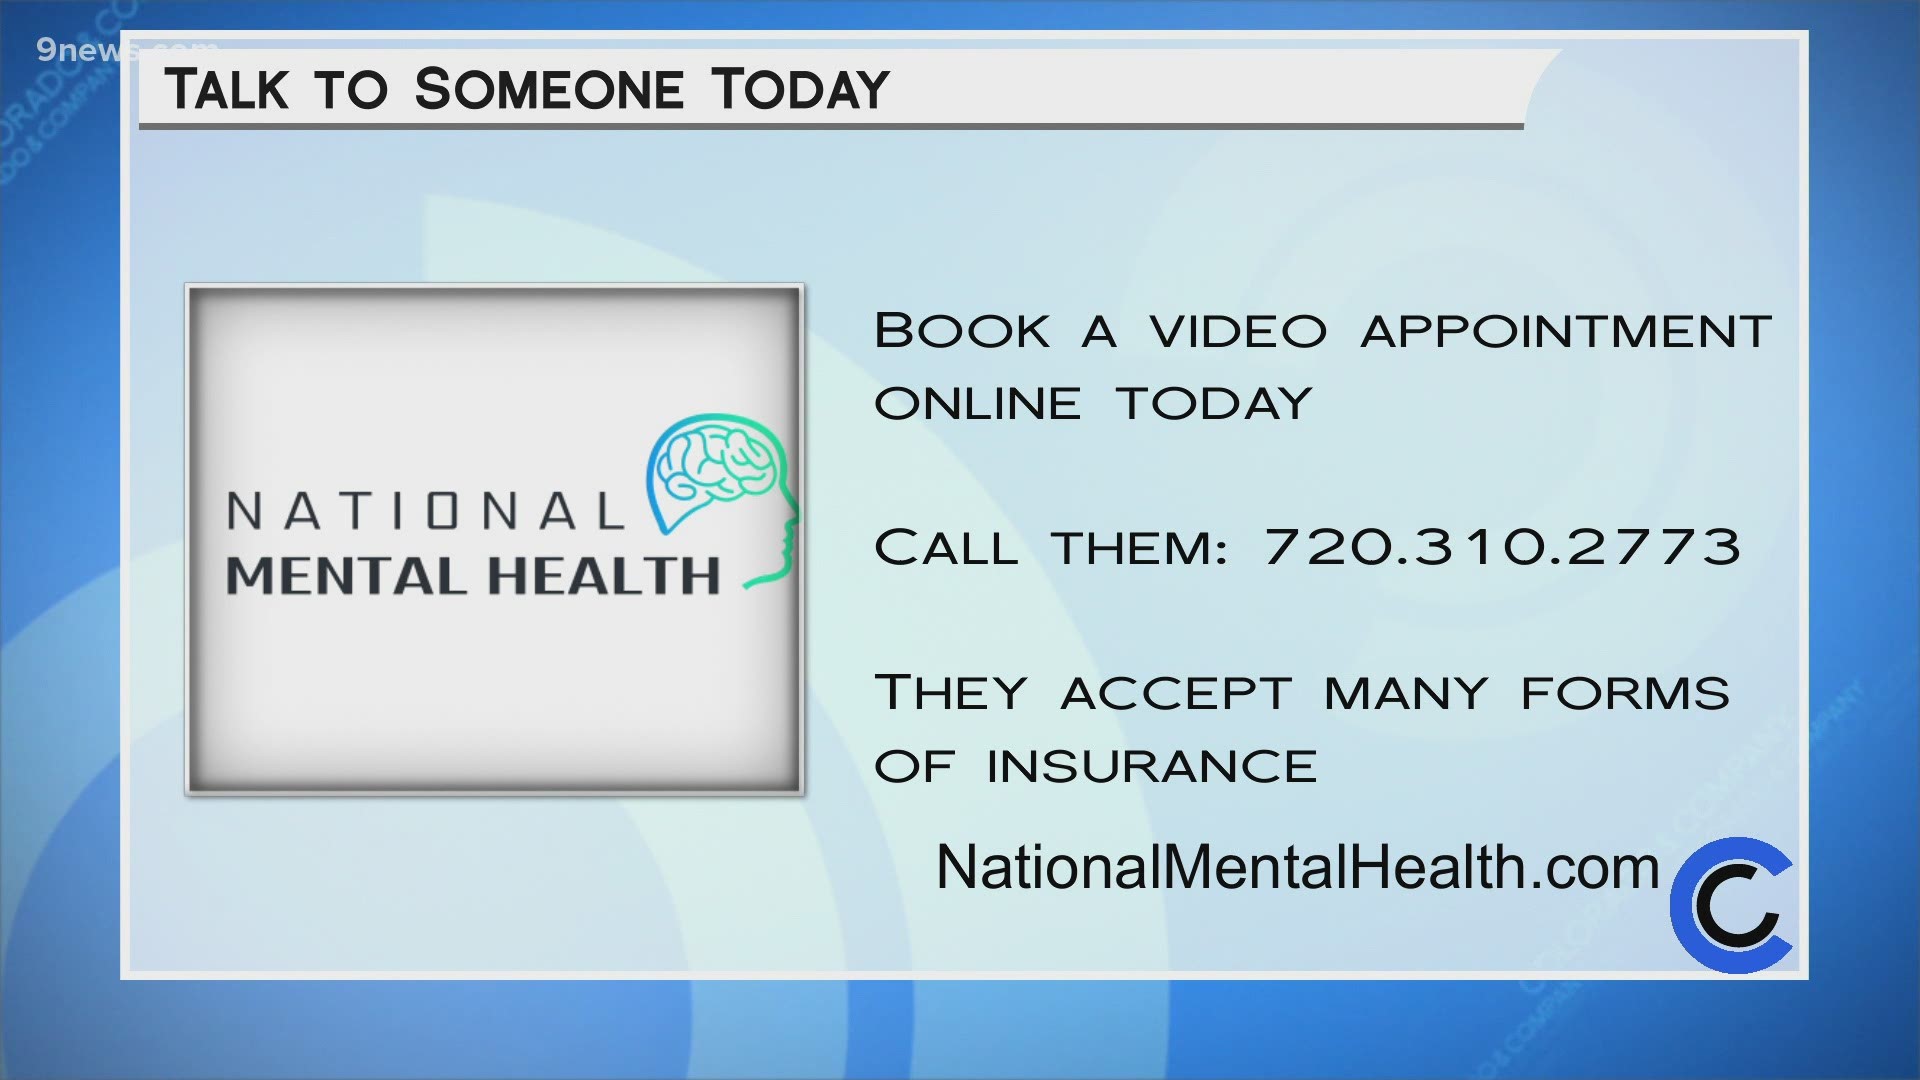 Book a video visit with National Mental Health by calling 720.310.2773 or online at NationalMentalHealth.com.